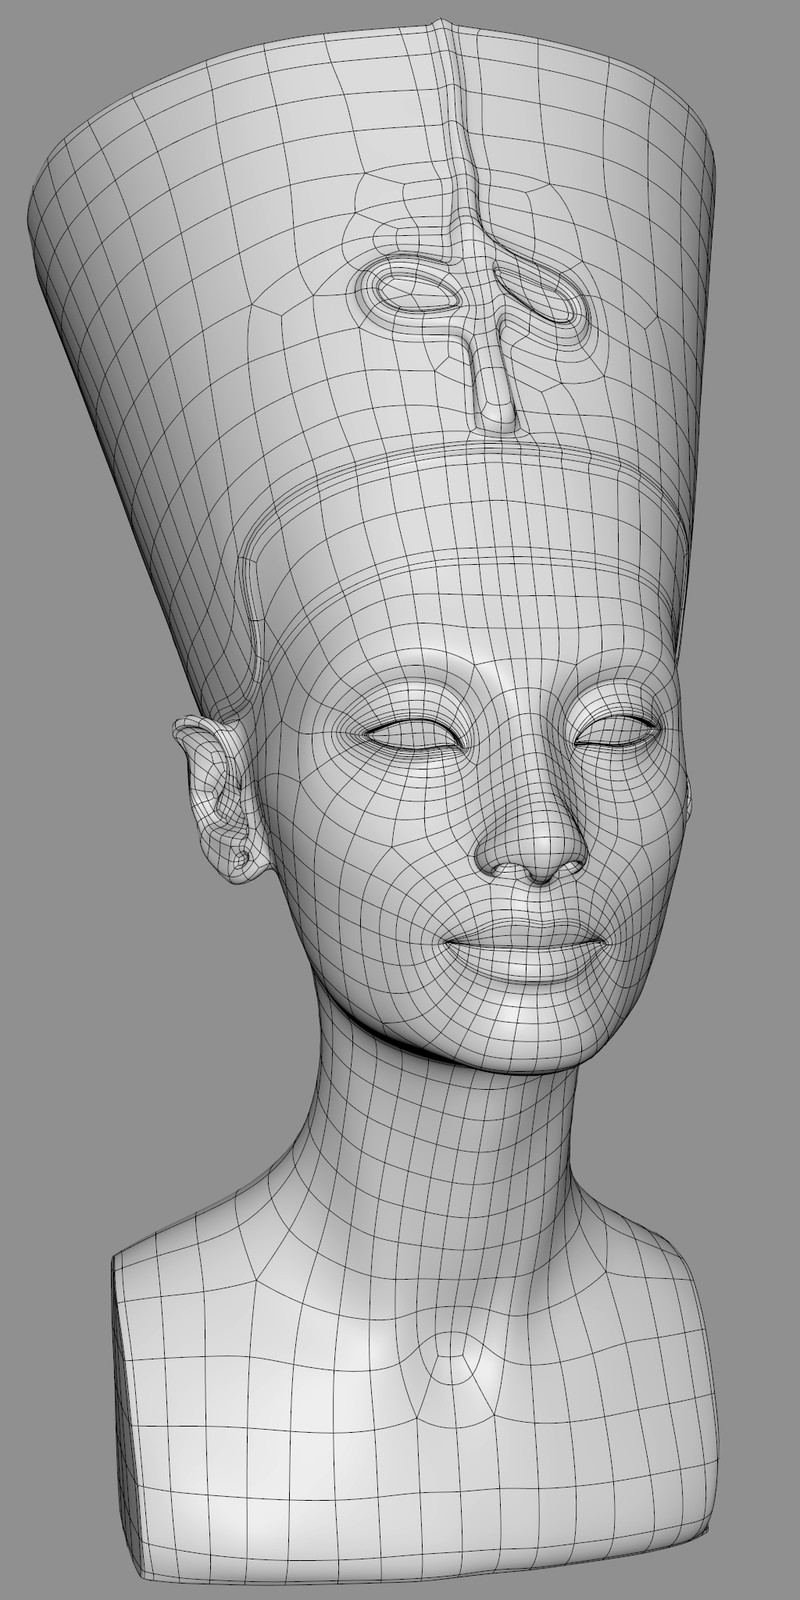 This is a retopo model I did on a scan of the original Nefertiti sculpture.